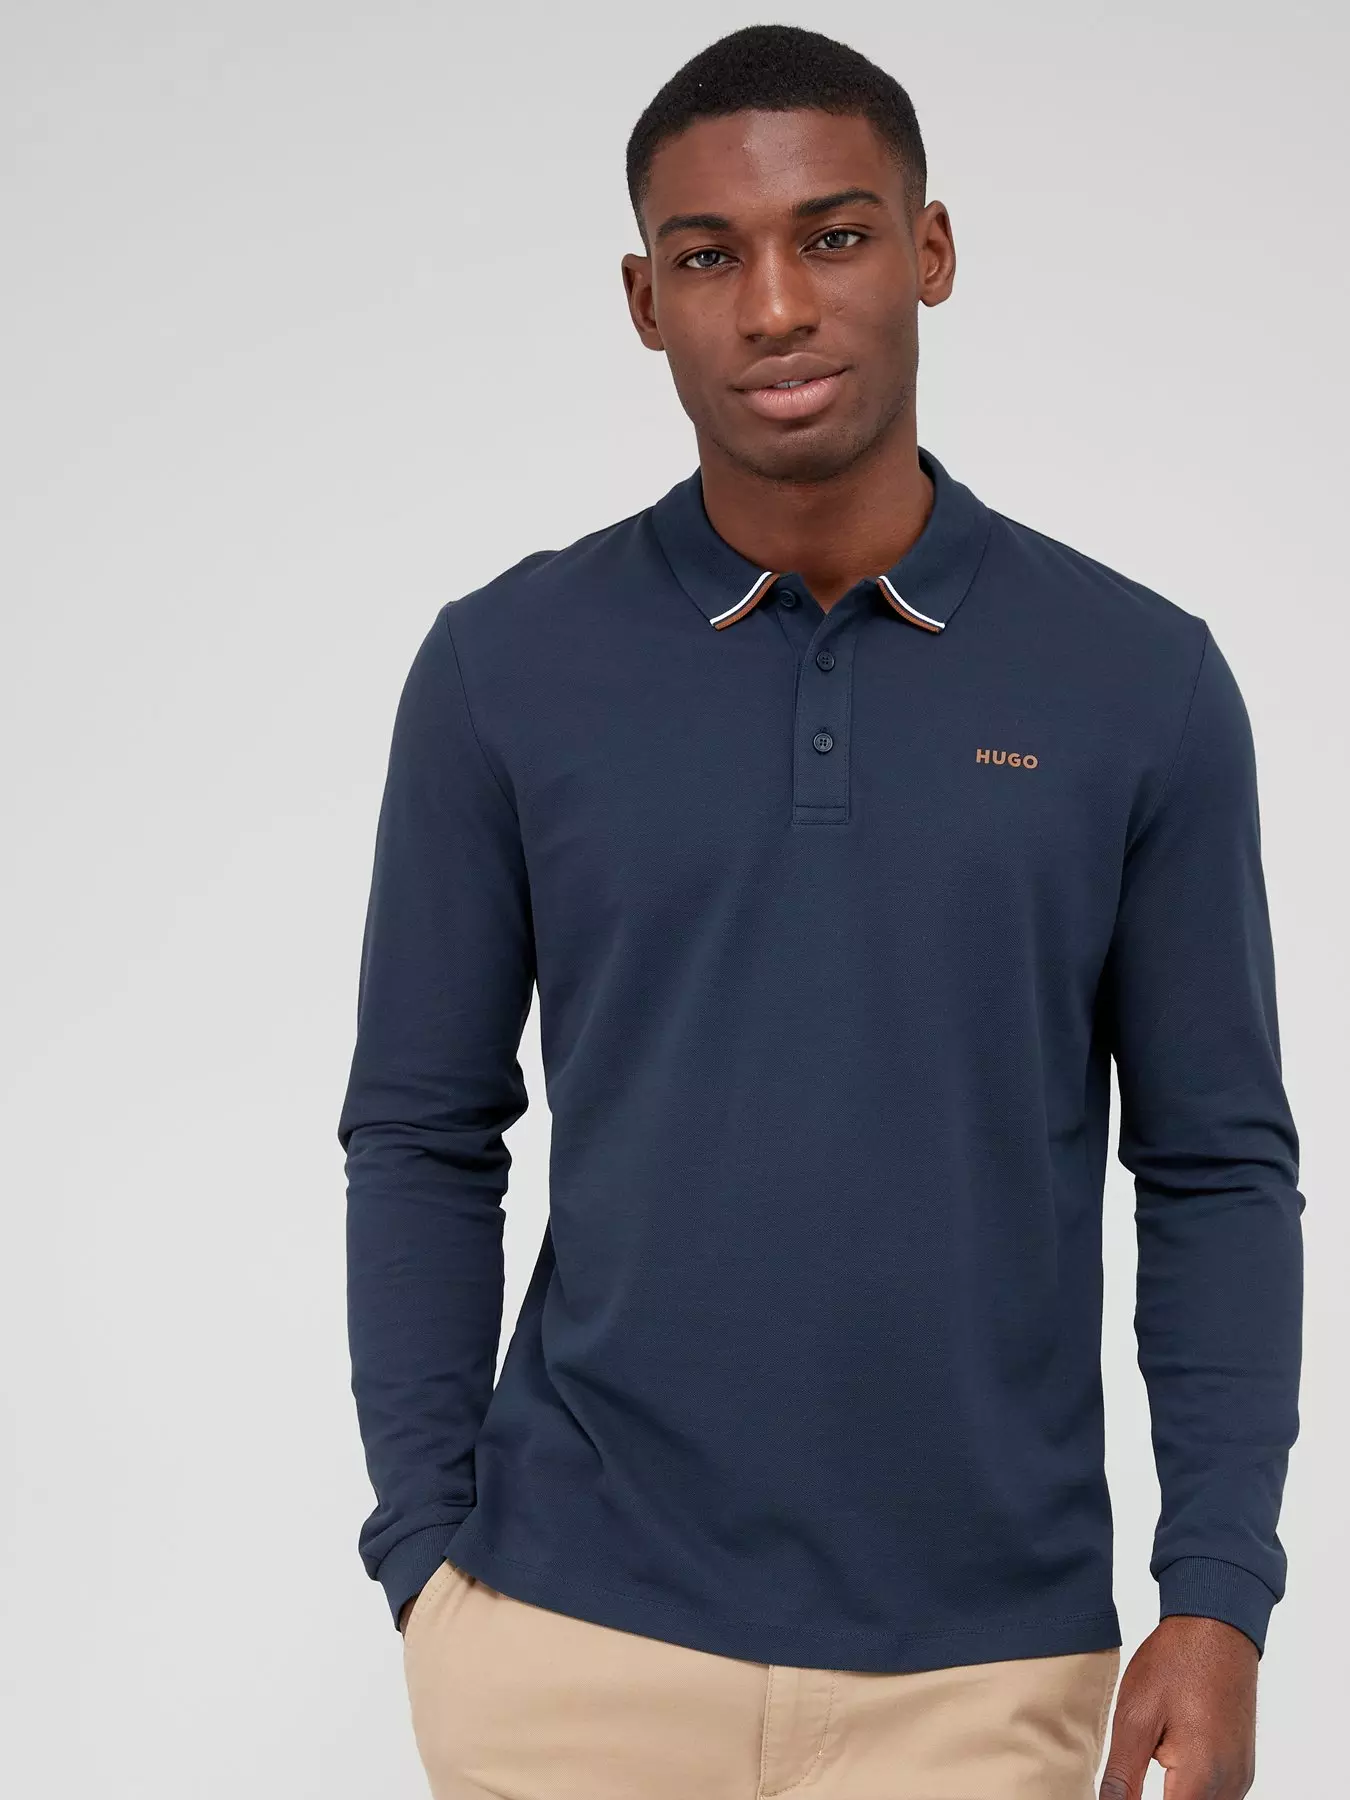 Lacoste Polo Shirt: Is It Worth It? (In-Depth Review)